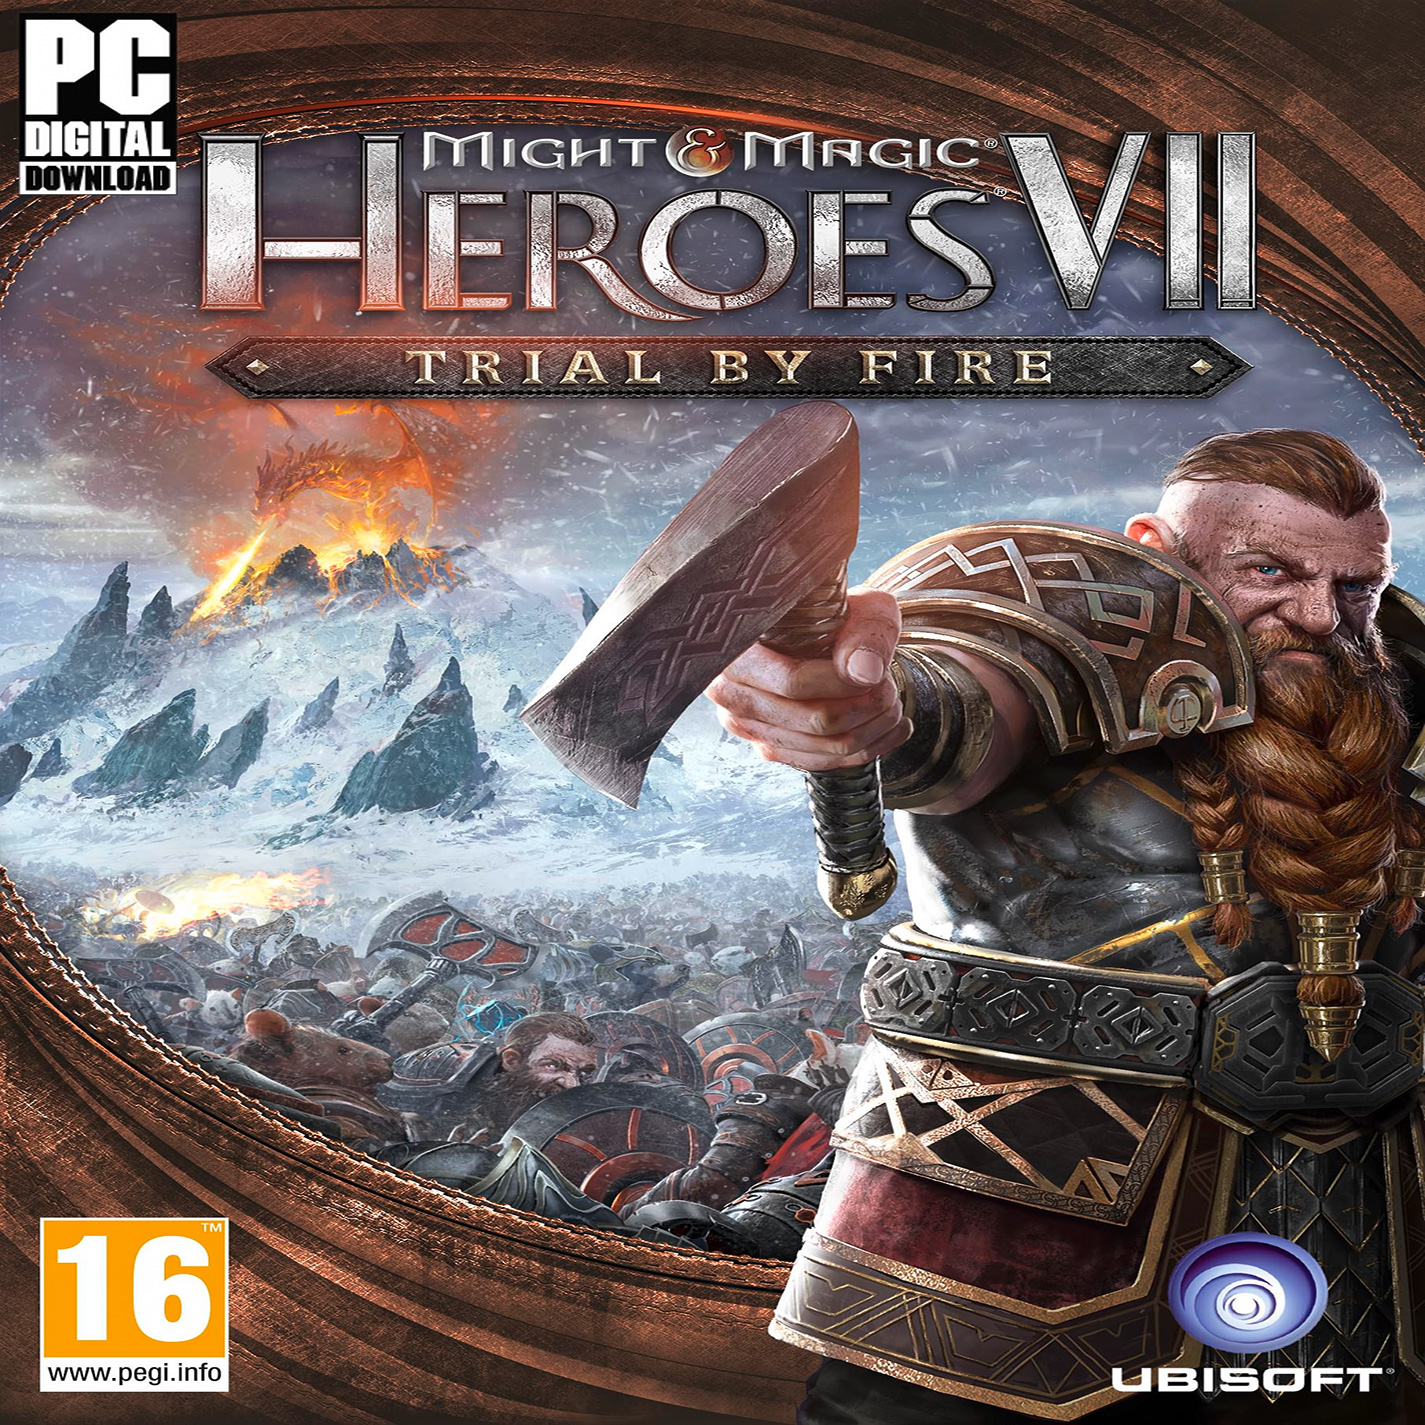 Might & Magic Heroes VII - Trial by Fire - pedn CD obal